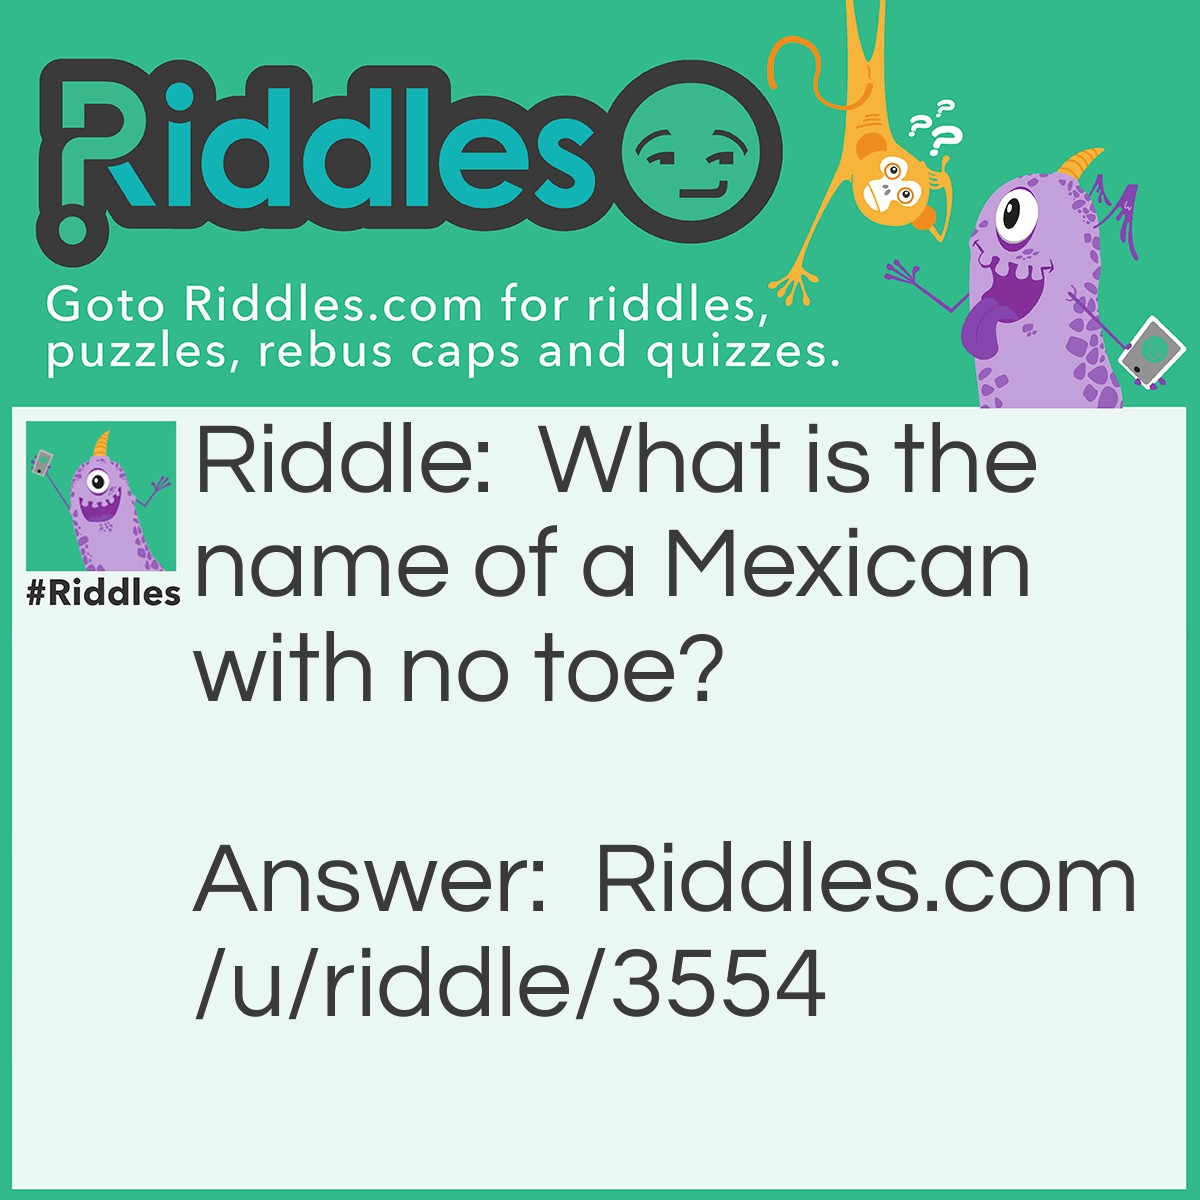 Riddle: What is the name of a Mexican with no toe? Answer: Rubber-toe.